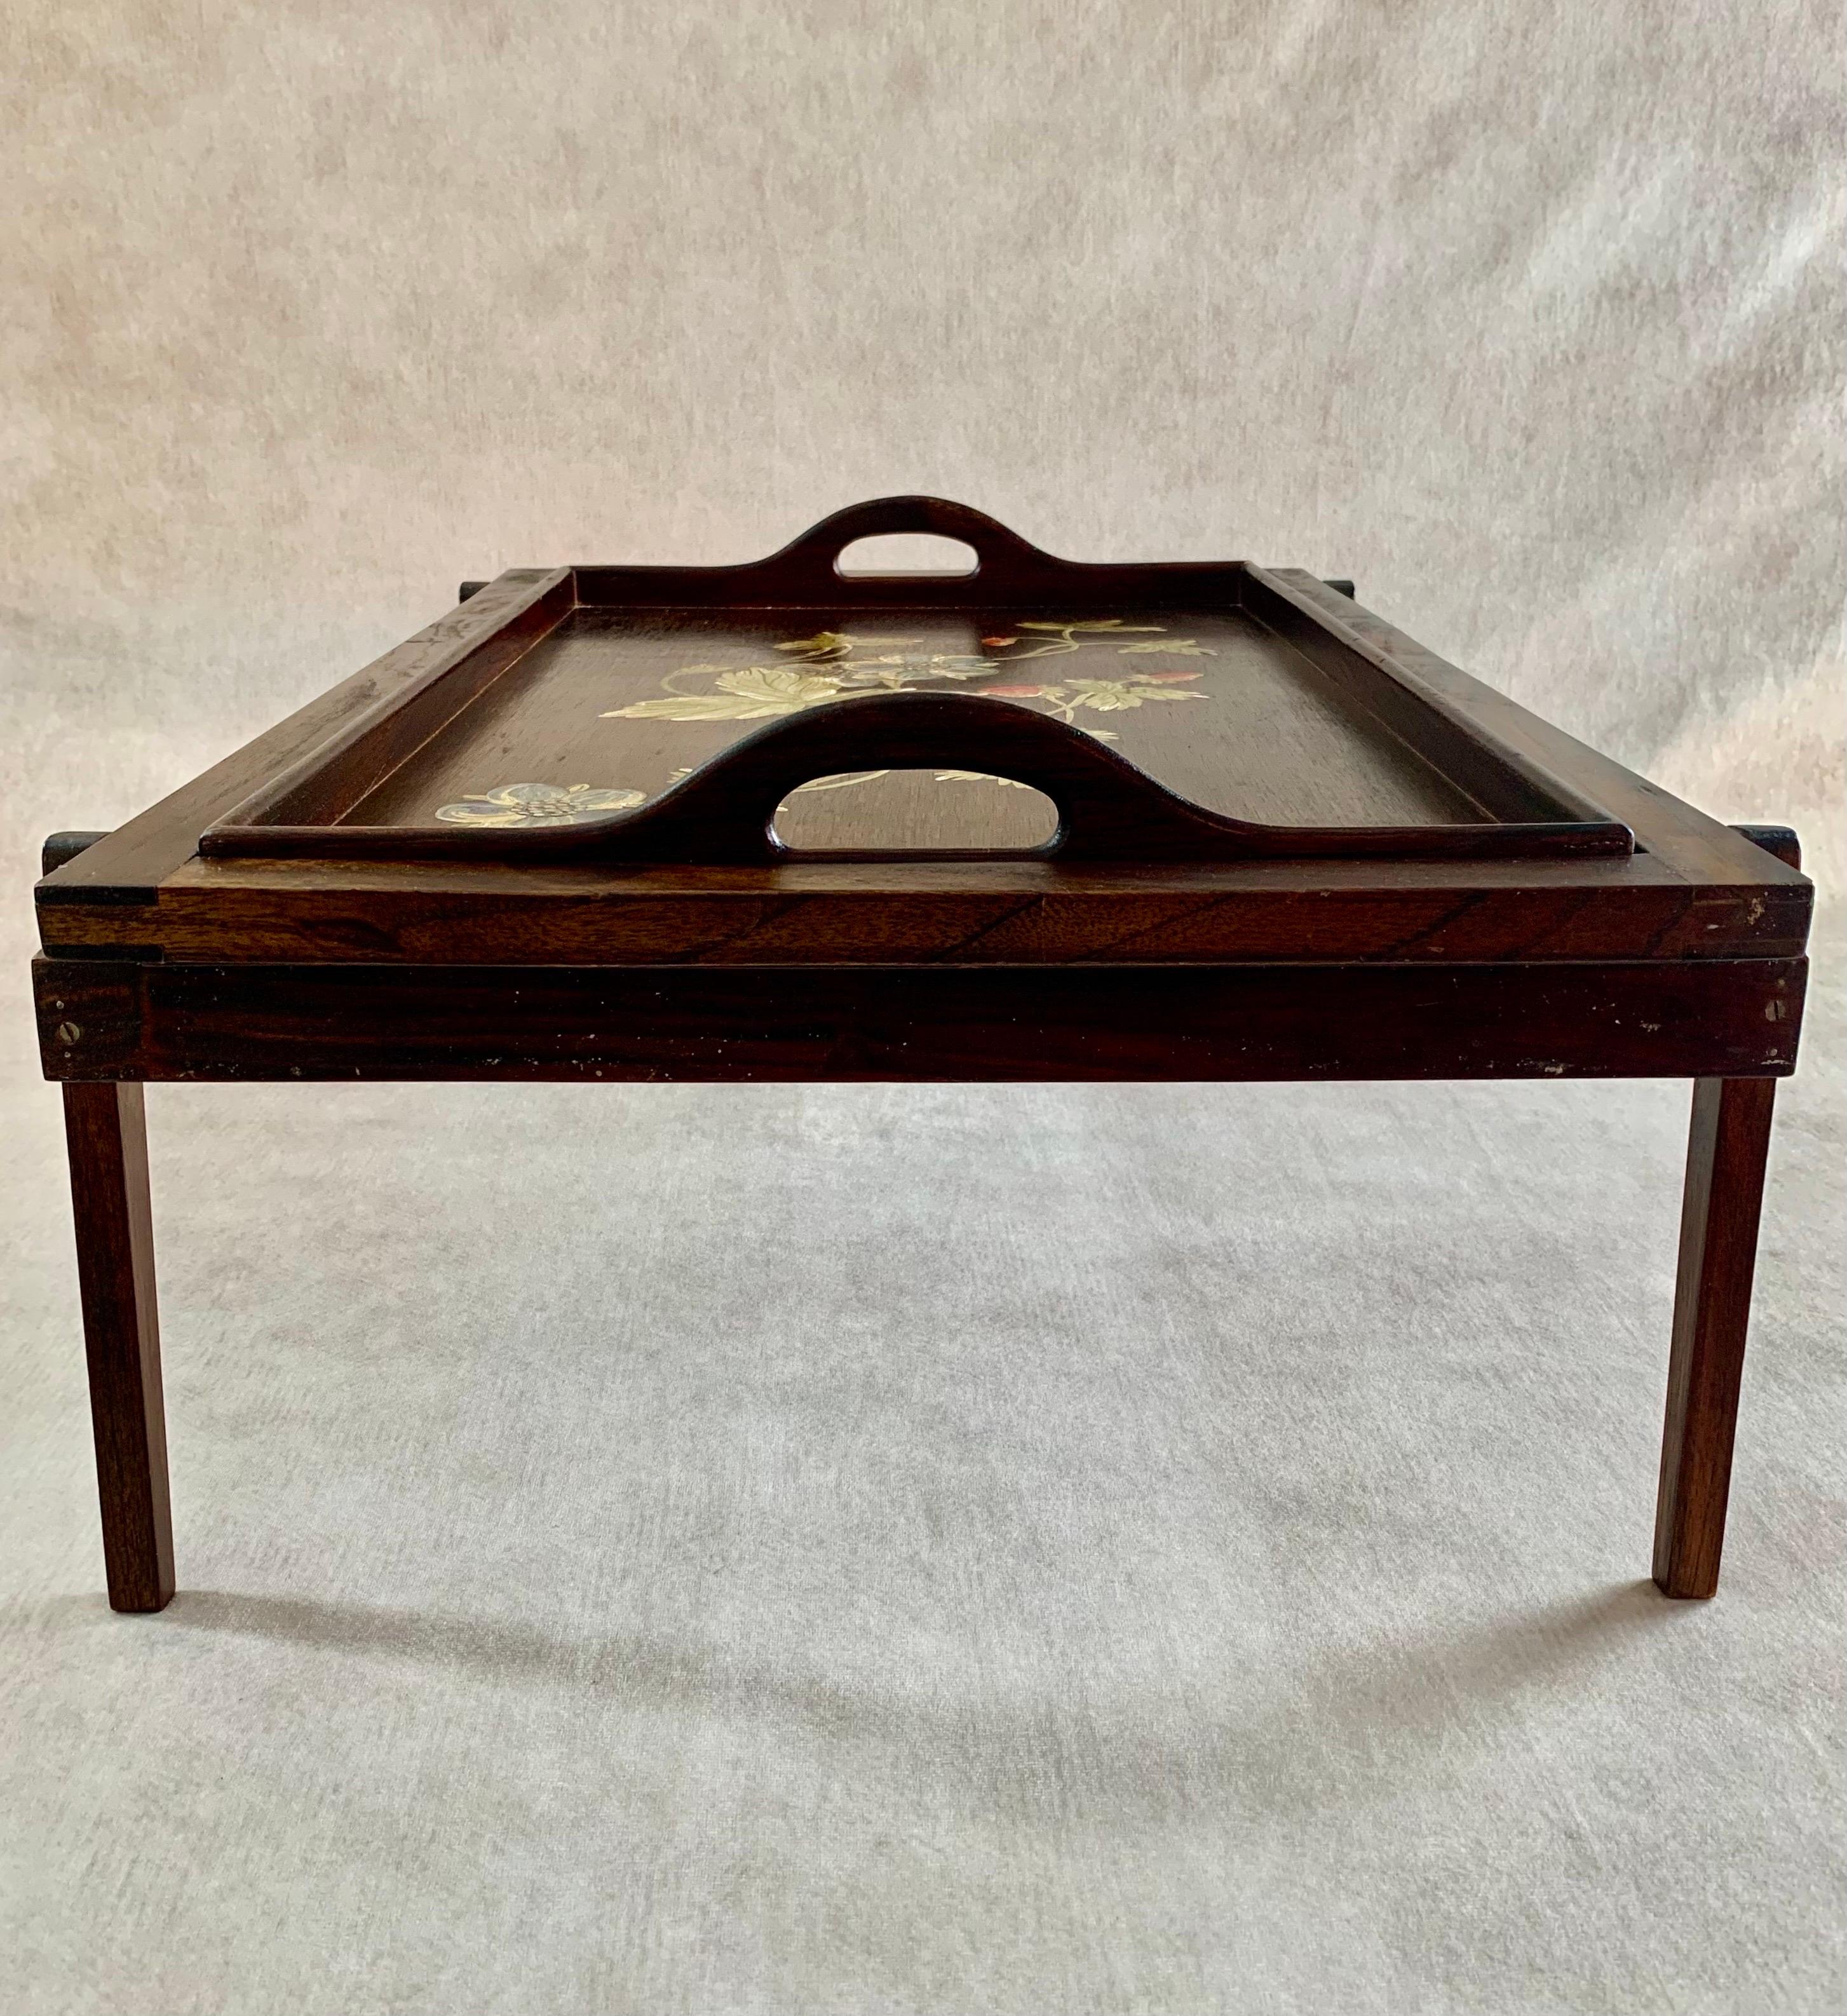 A beautifully hand-painted floral breakfast-in bed tray with removable stand crafted from Guanacaste and Mahogany woods native to Central America.  Made in El Salvador circa 1940.  

A unique vintage piece rich in culture perfect for leisurely